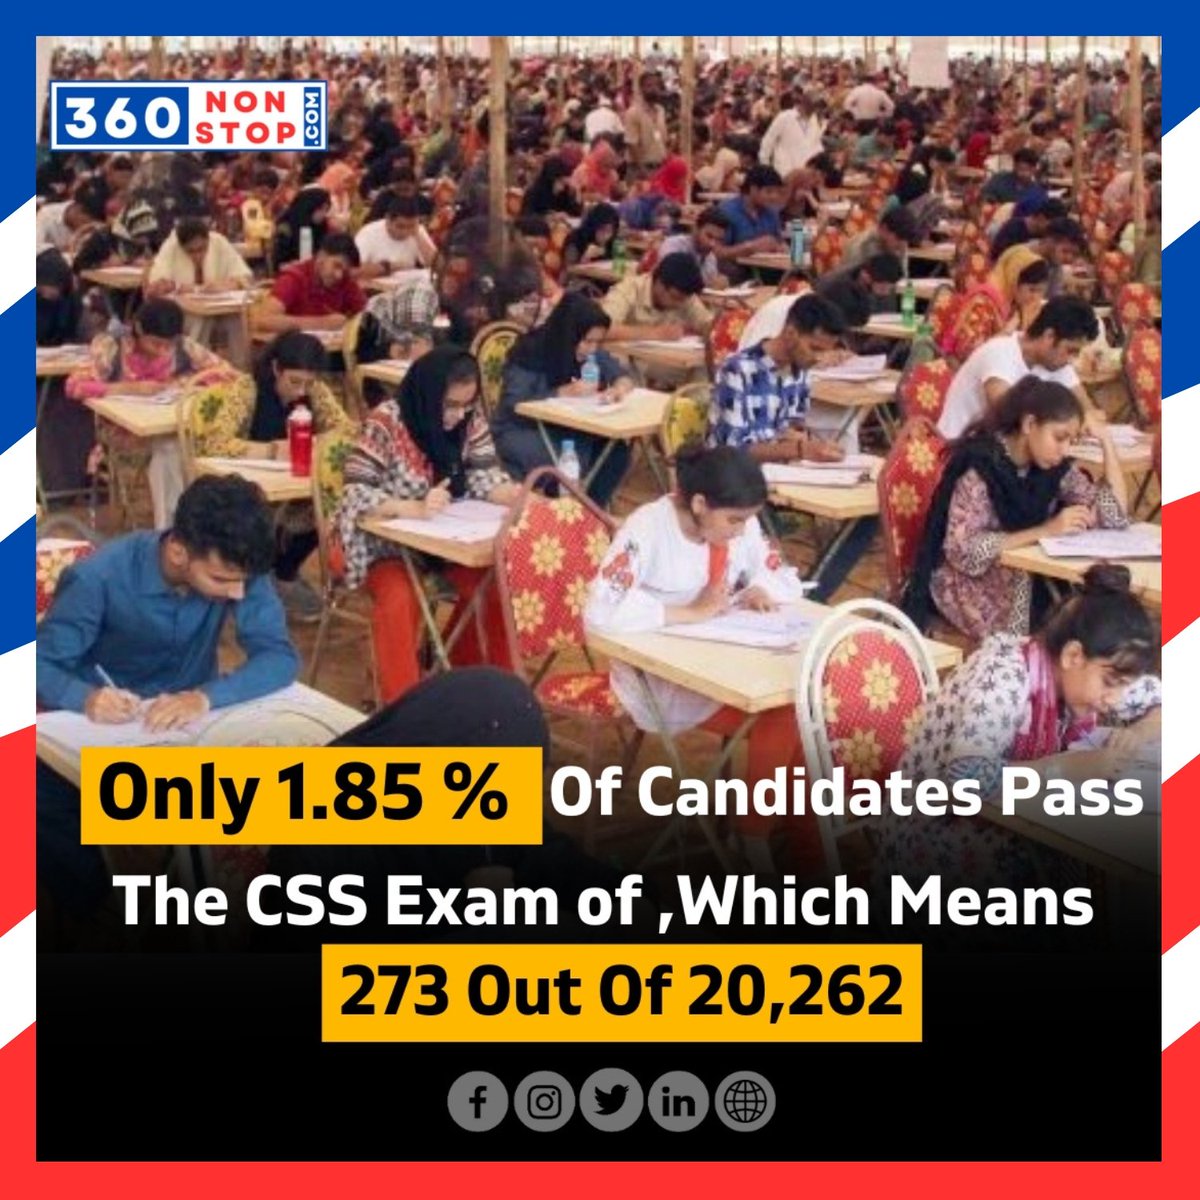 Only 1.85% of candidates pass the CSS Exam, which means 273 out of 20,262.

#CSSExamPassRate #CSSExamResults #AchievingExcellence #EliteCSSCandidates #SelectiveCSSExam #SuccessInNumbers #CSSExamStatistics #CSSExamAchievement #PassingTheCSSChallenge #CSSExam #360nonstop